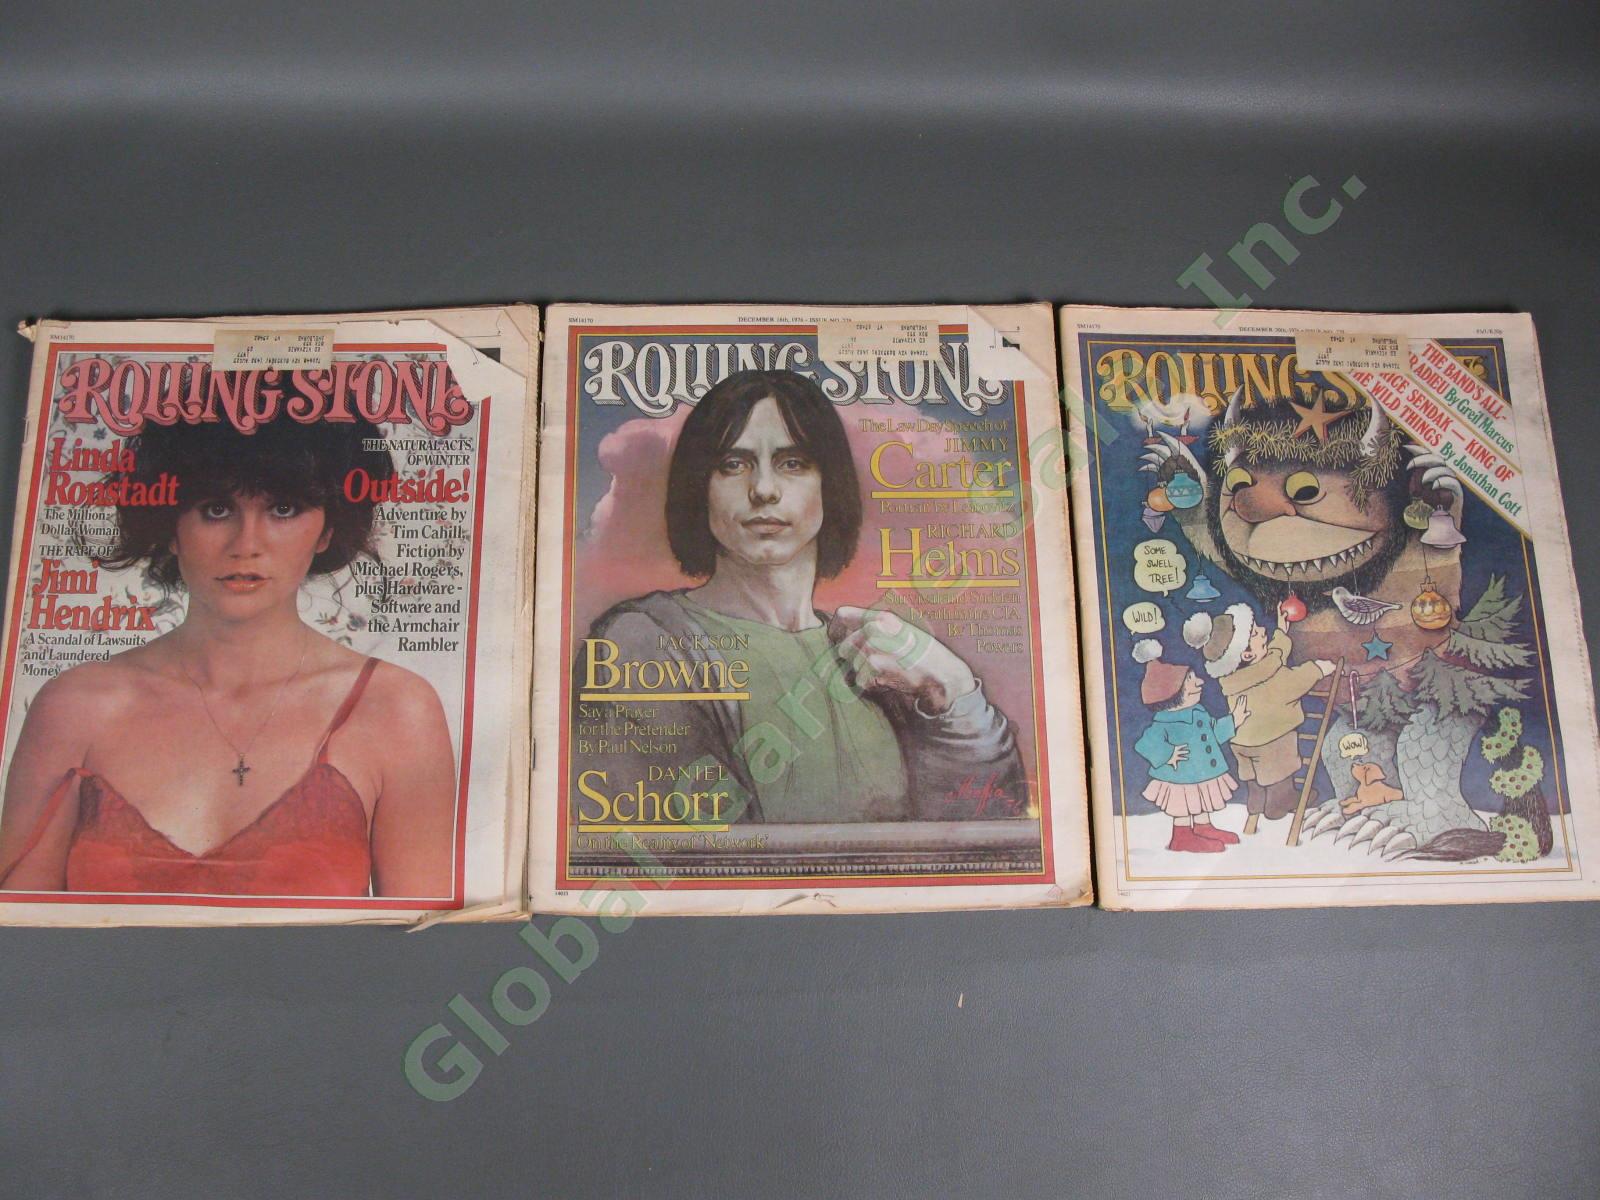 27 VINTAGE 1976 Rolling Stone Magazine SET Collection COMPLETE Full Year Run LOT 6